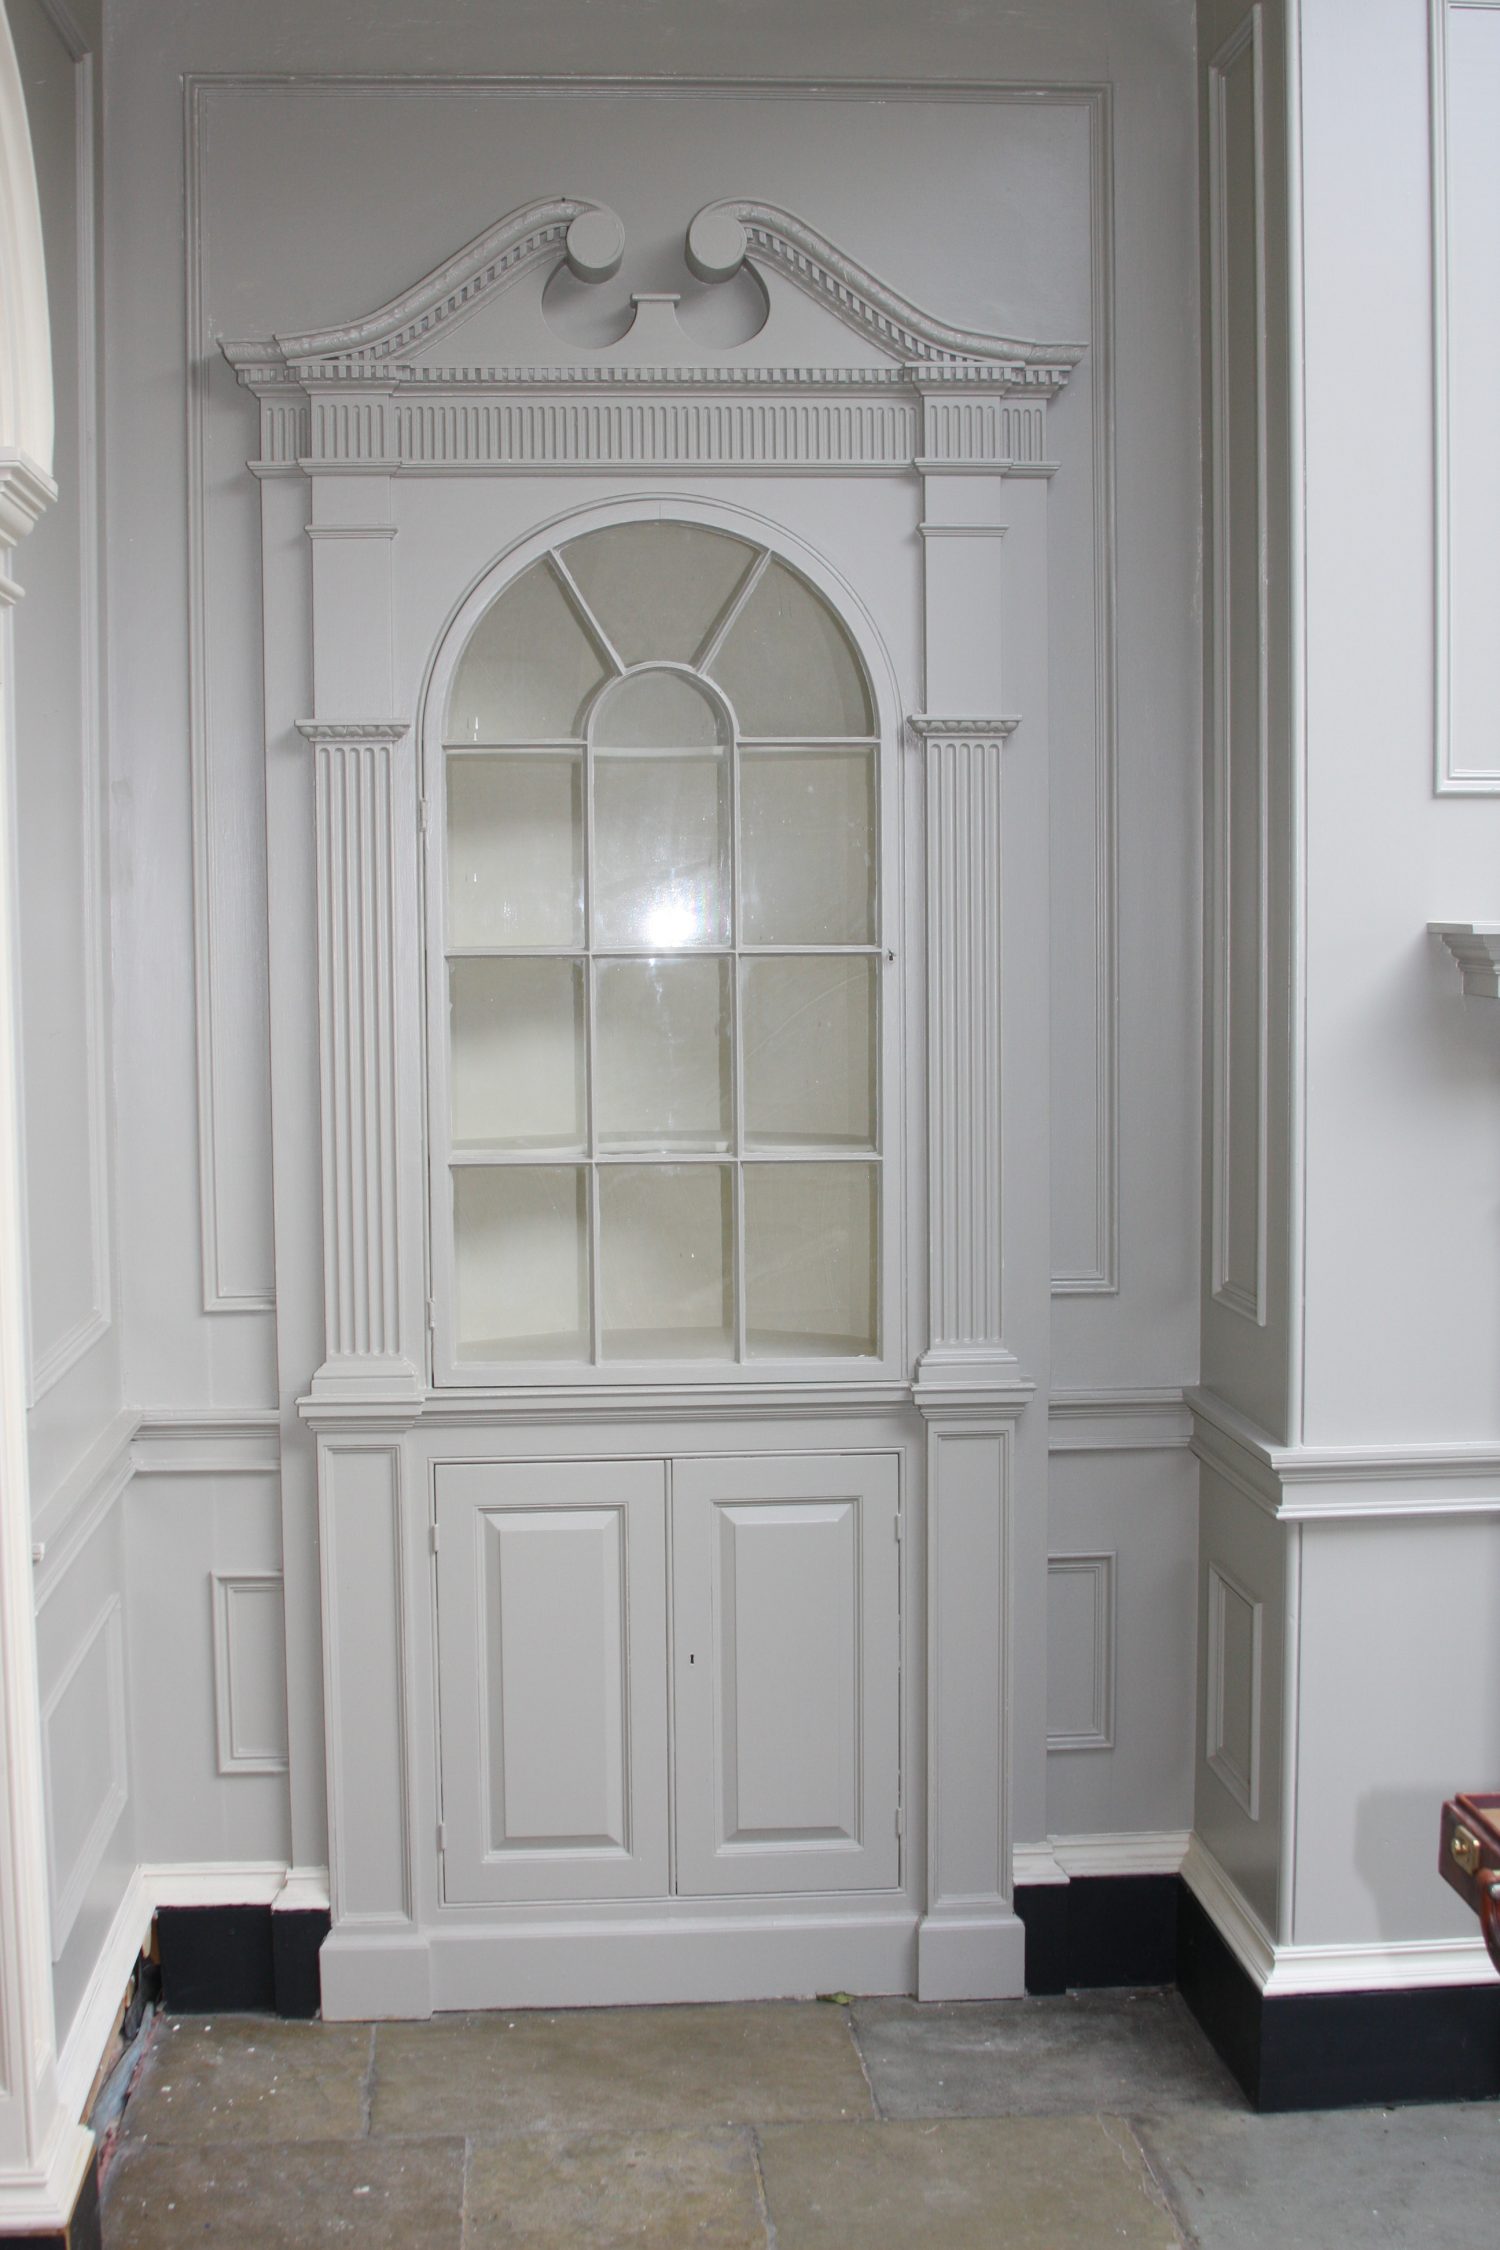 Cabinet Made to Match Existing in Other Alcove